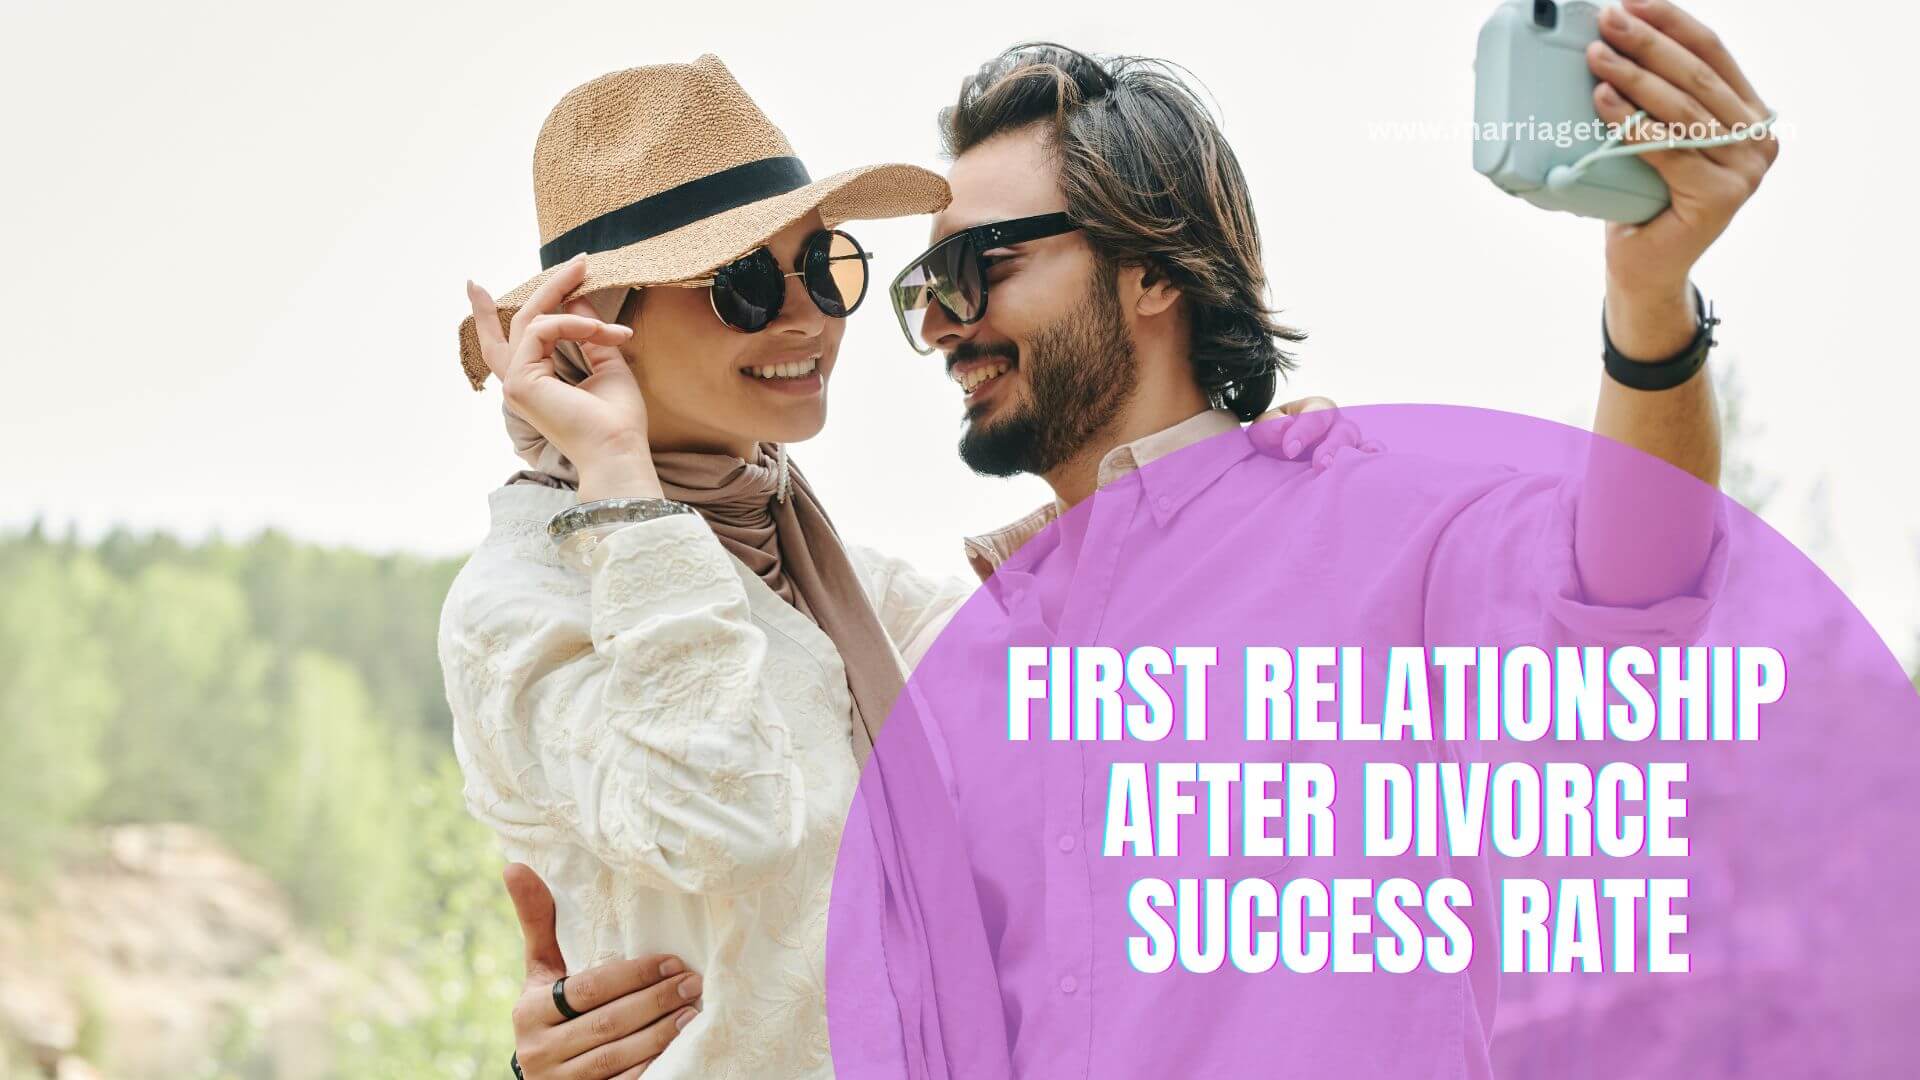 FIRST RELATIONSHIP AFTER DIVORCE SUCCESS RATE